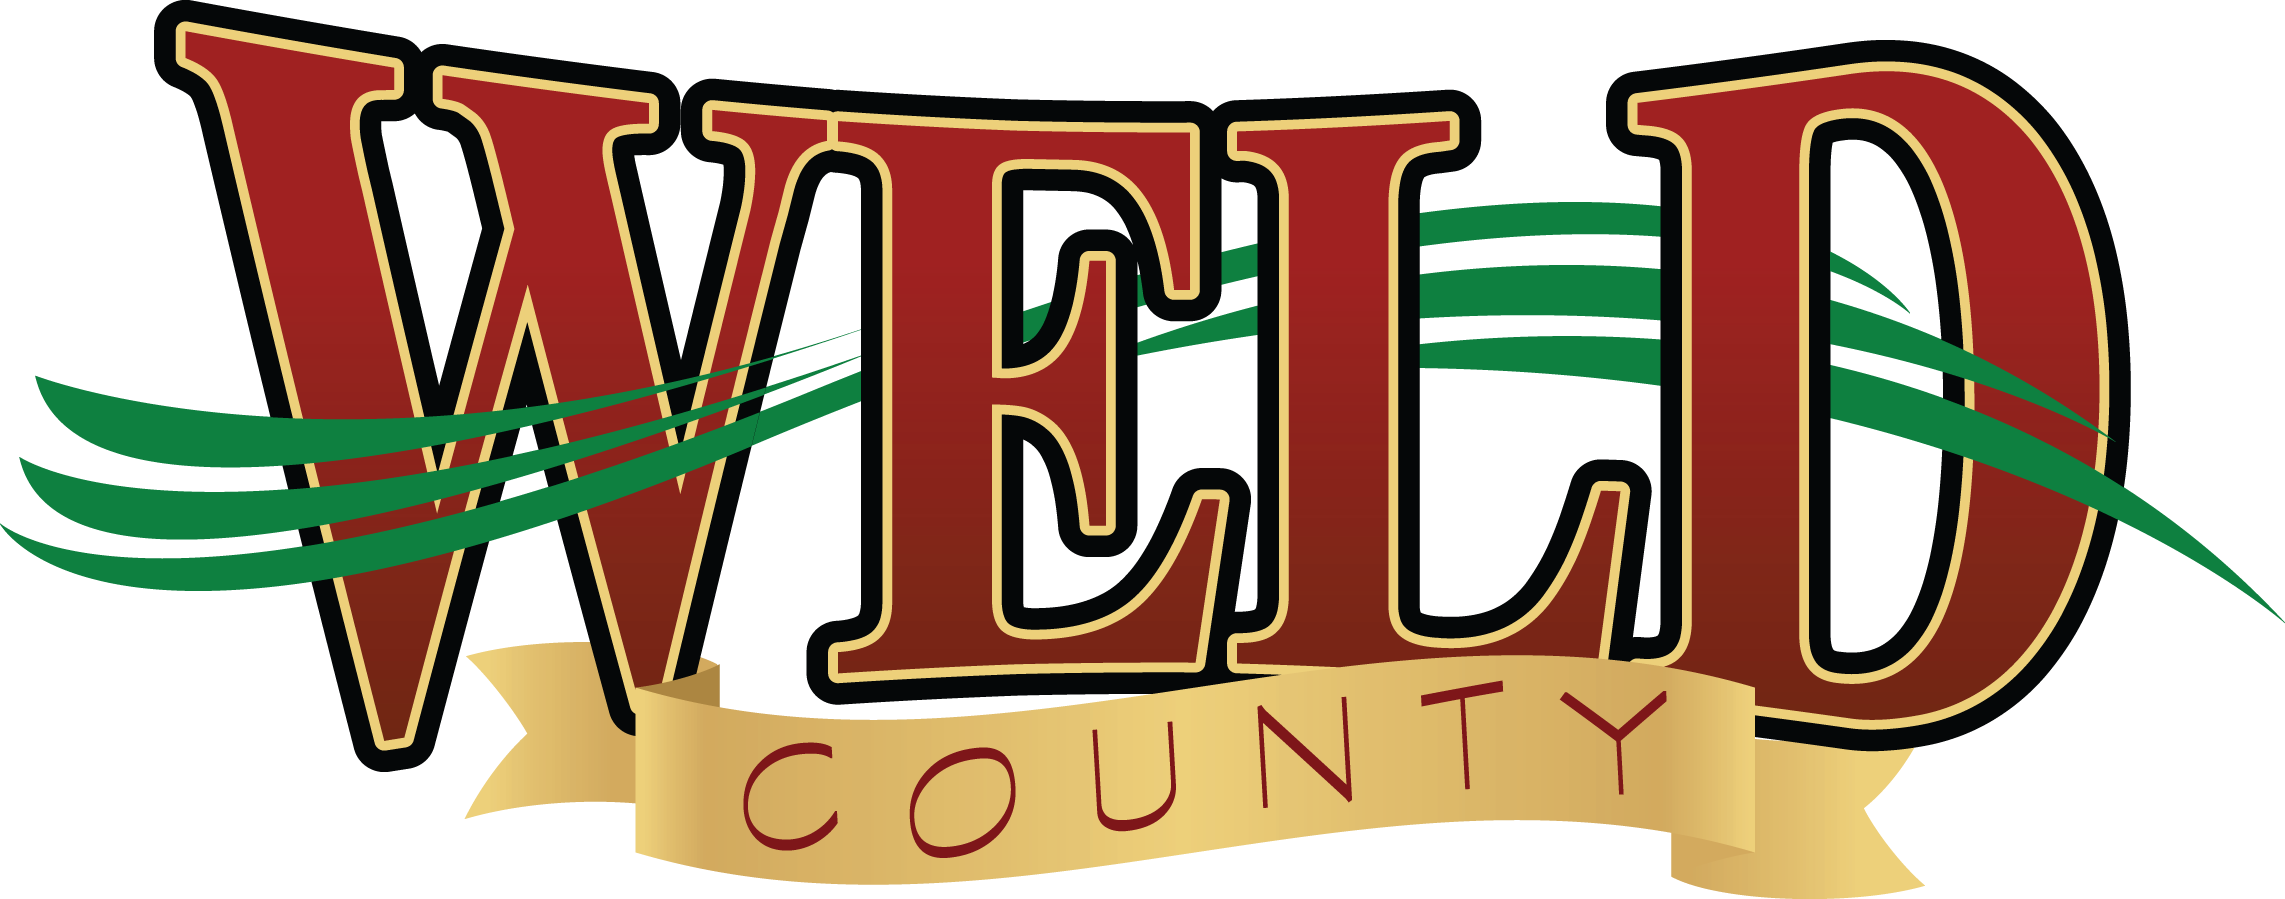 Weld County Government